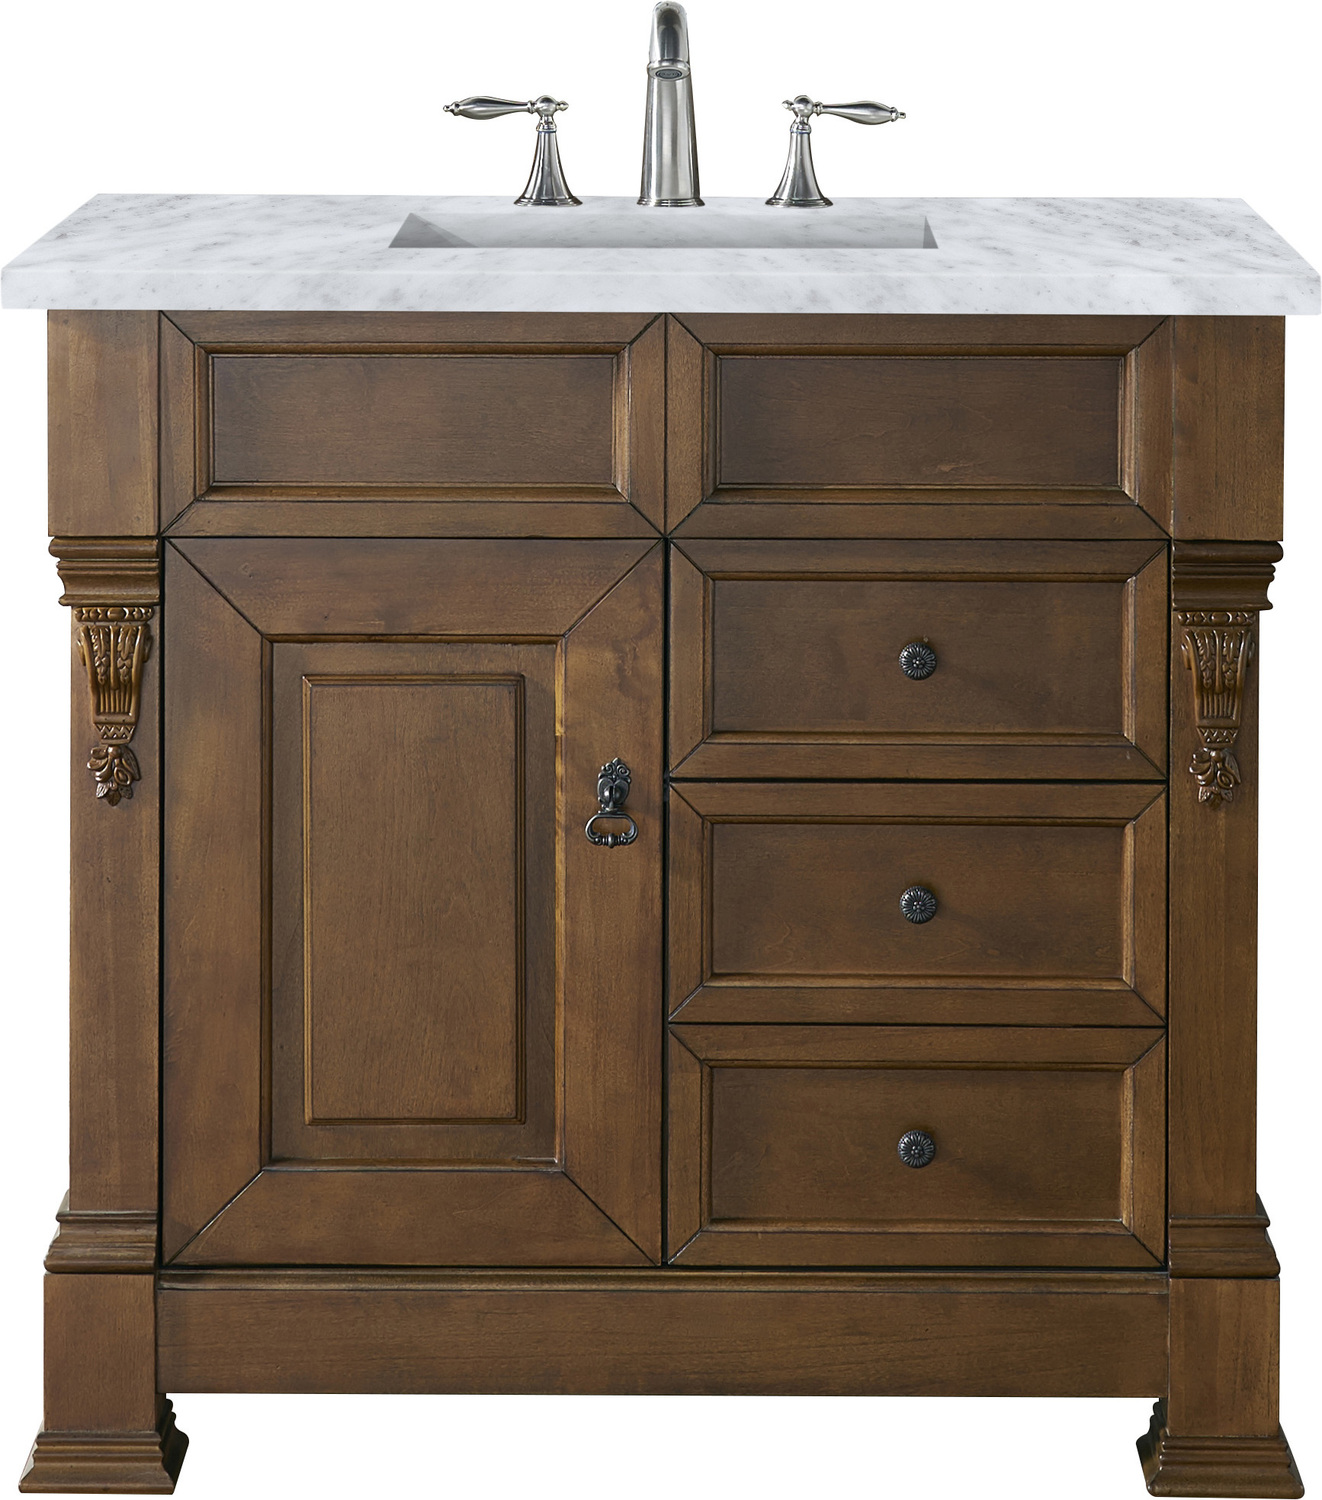 60 inch vanities with one sink James Martin Vanity Country Oak Transitional